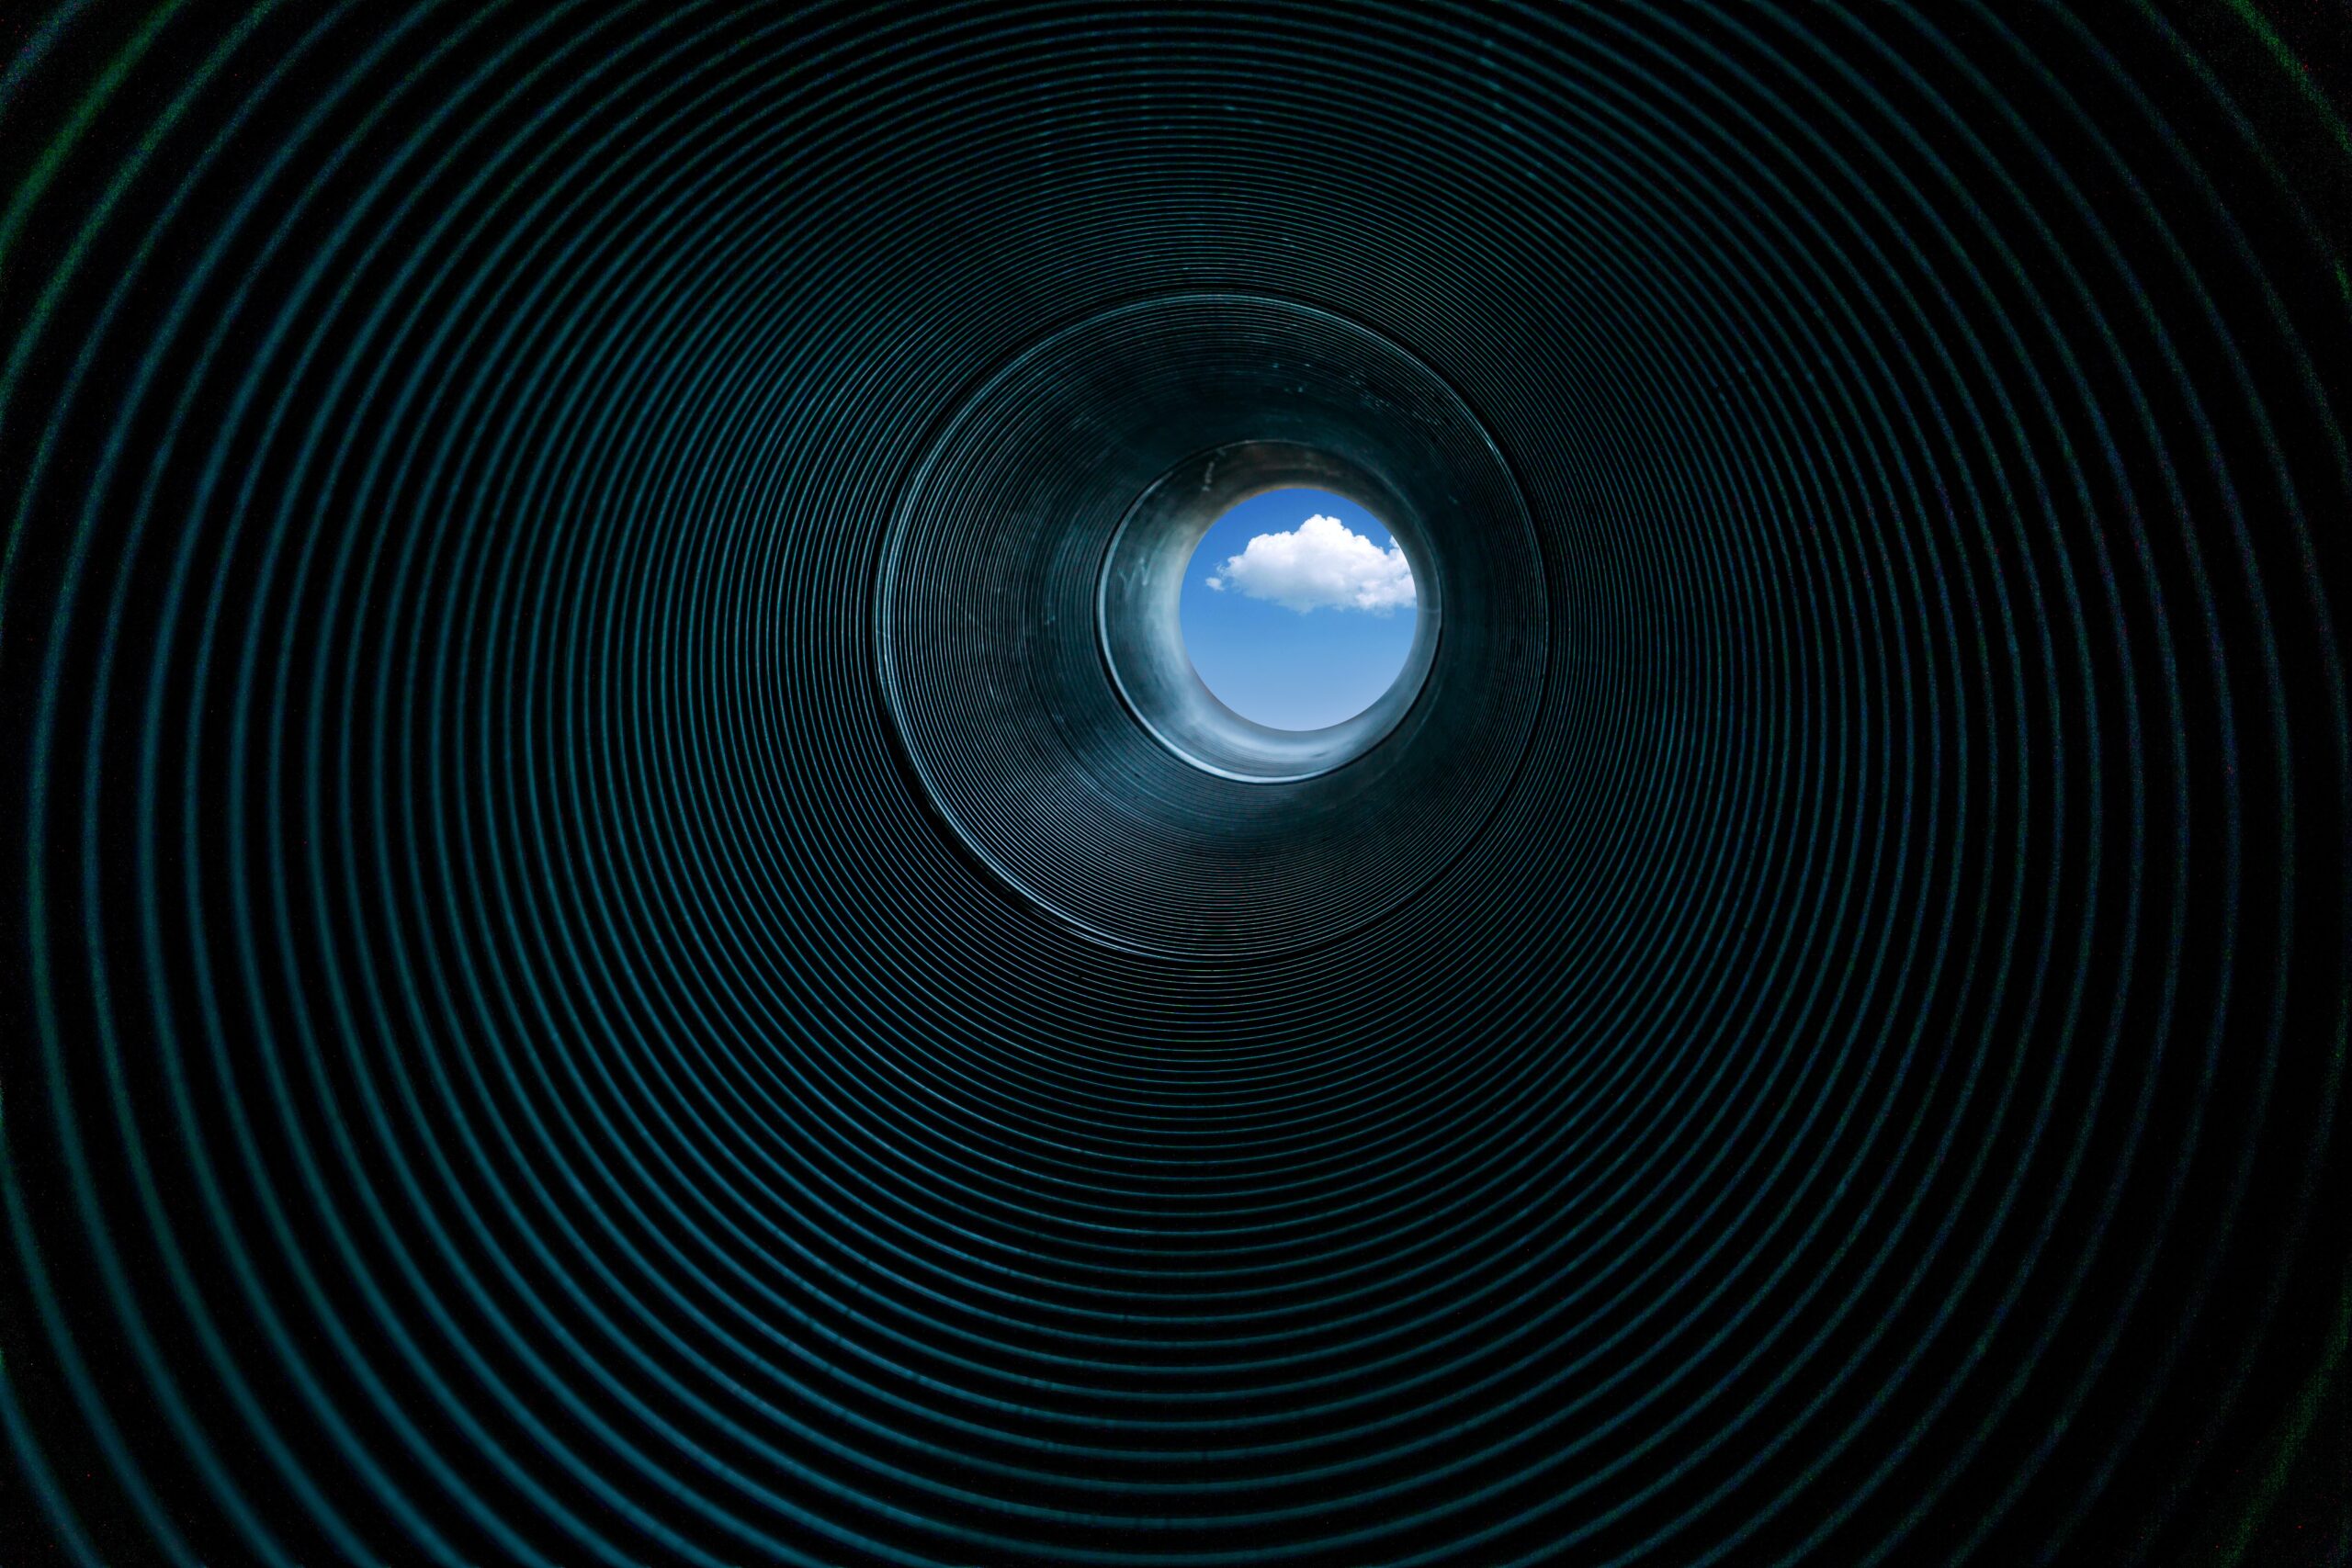 looking through a corrugated metal pipe toward a rich blue sky with white cloud in center of view